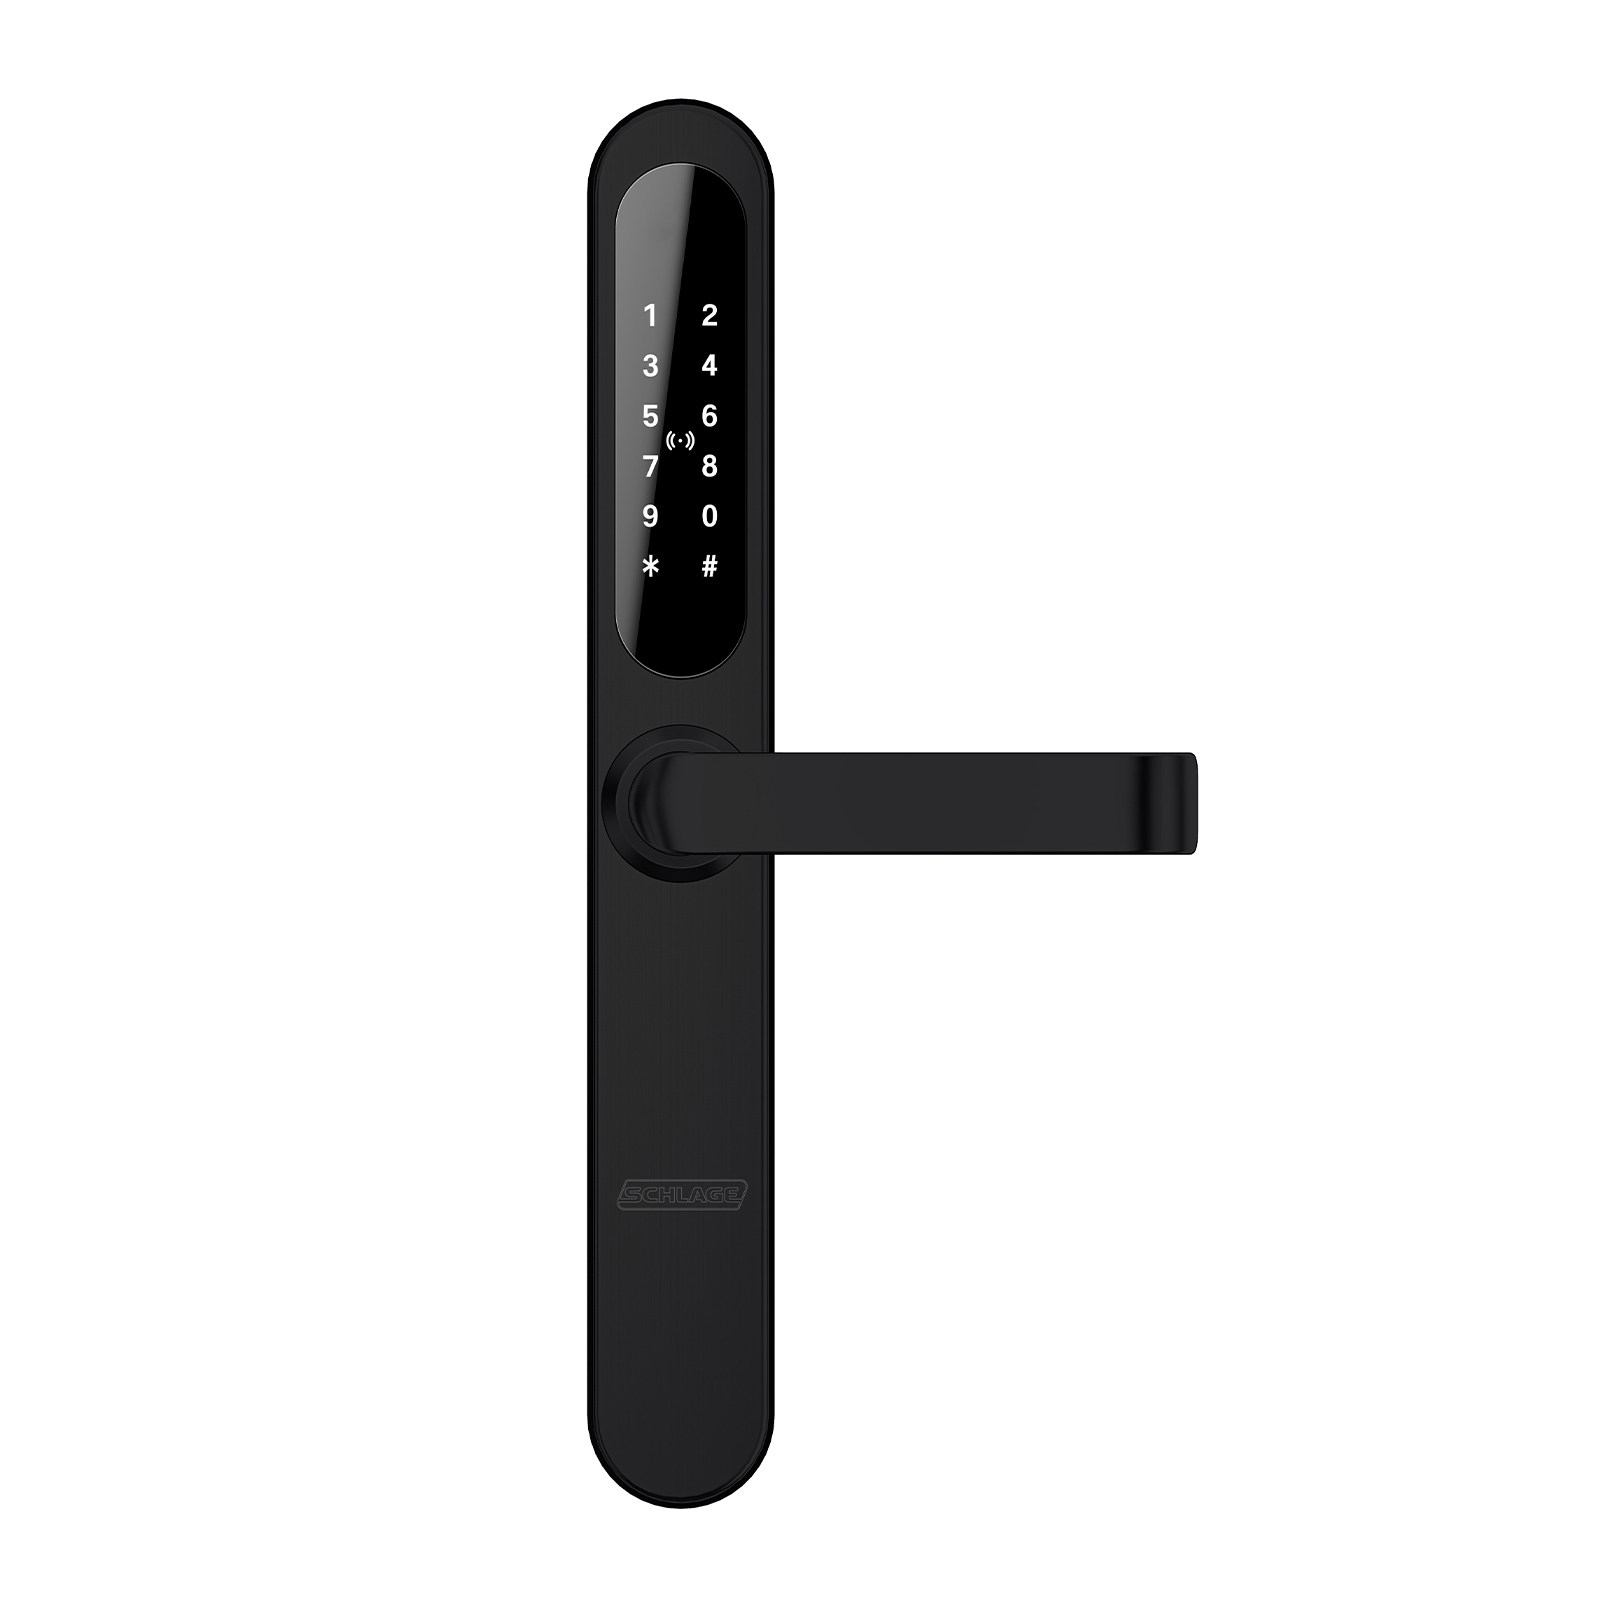 ease S2 smart entry lock